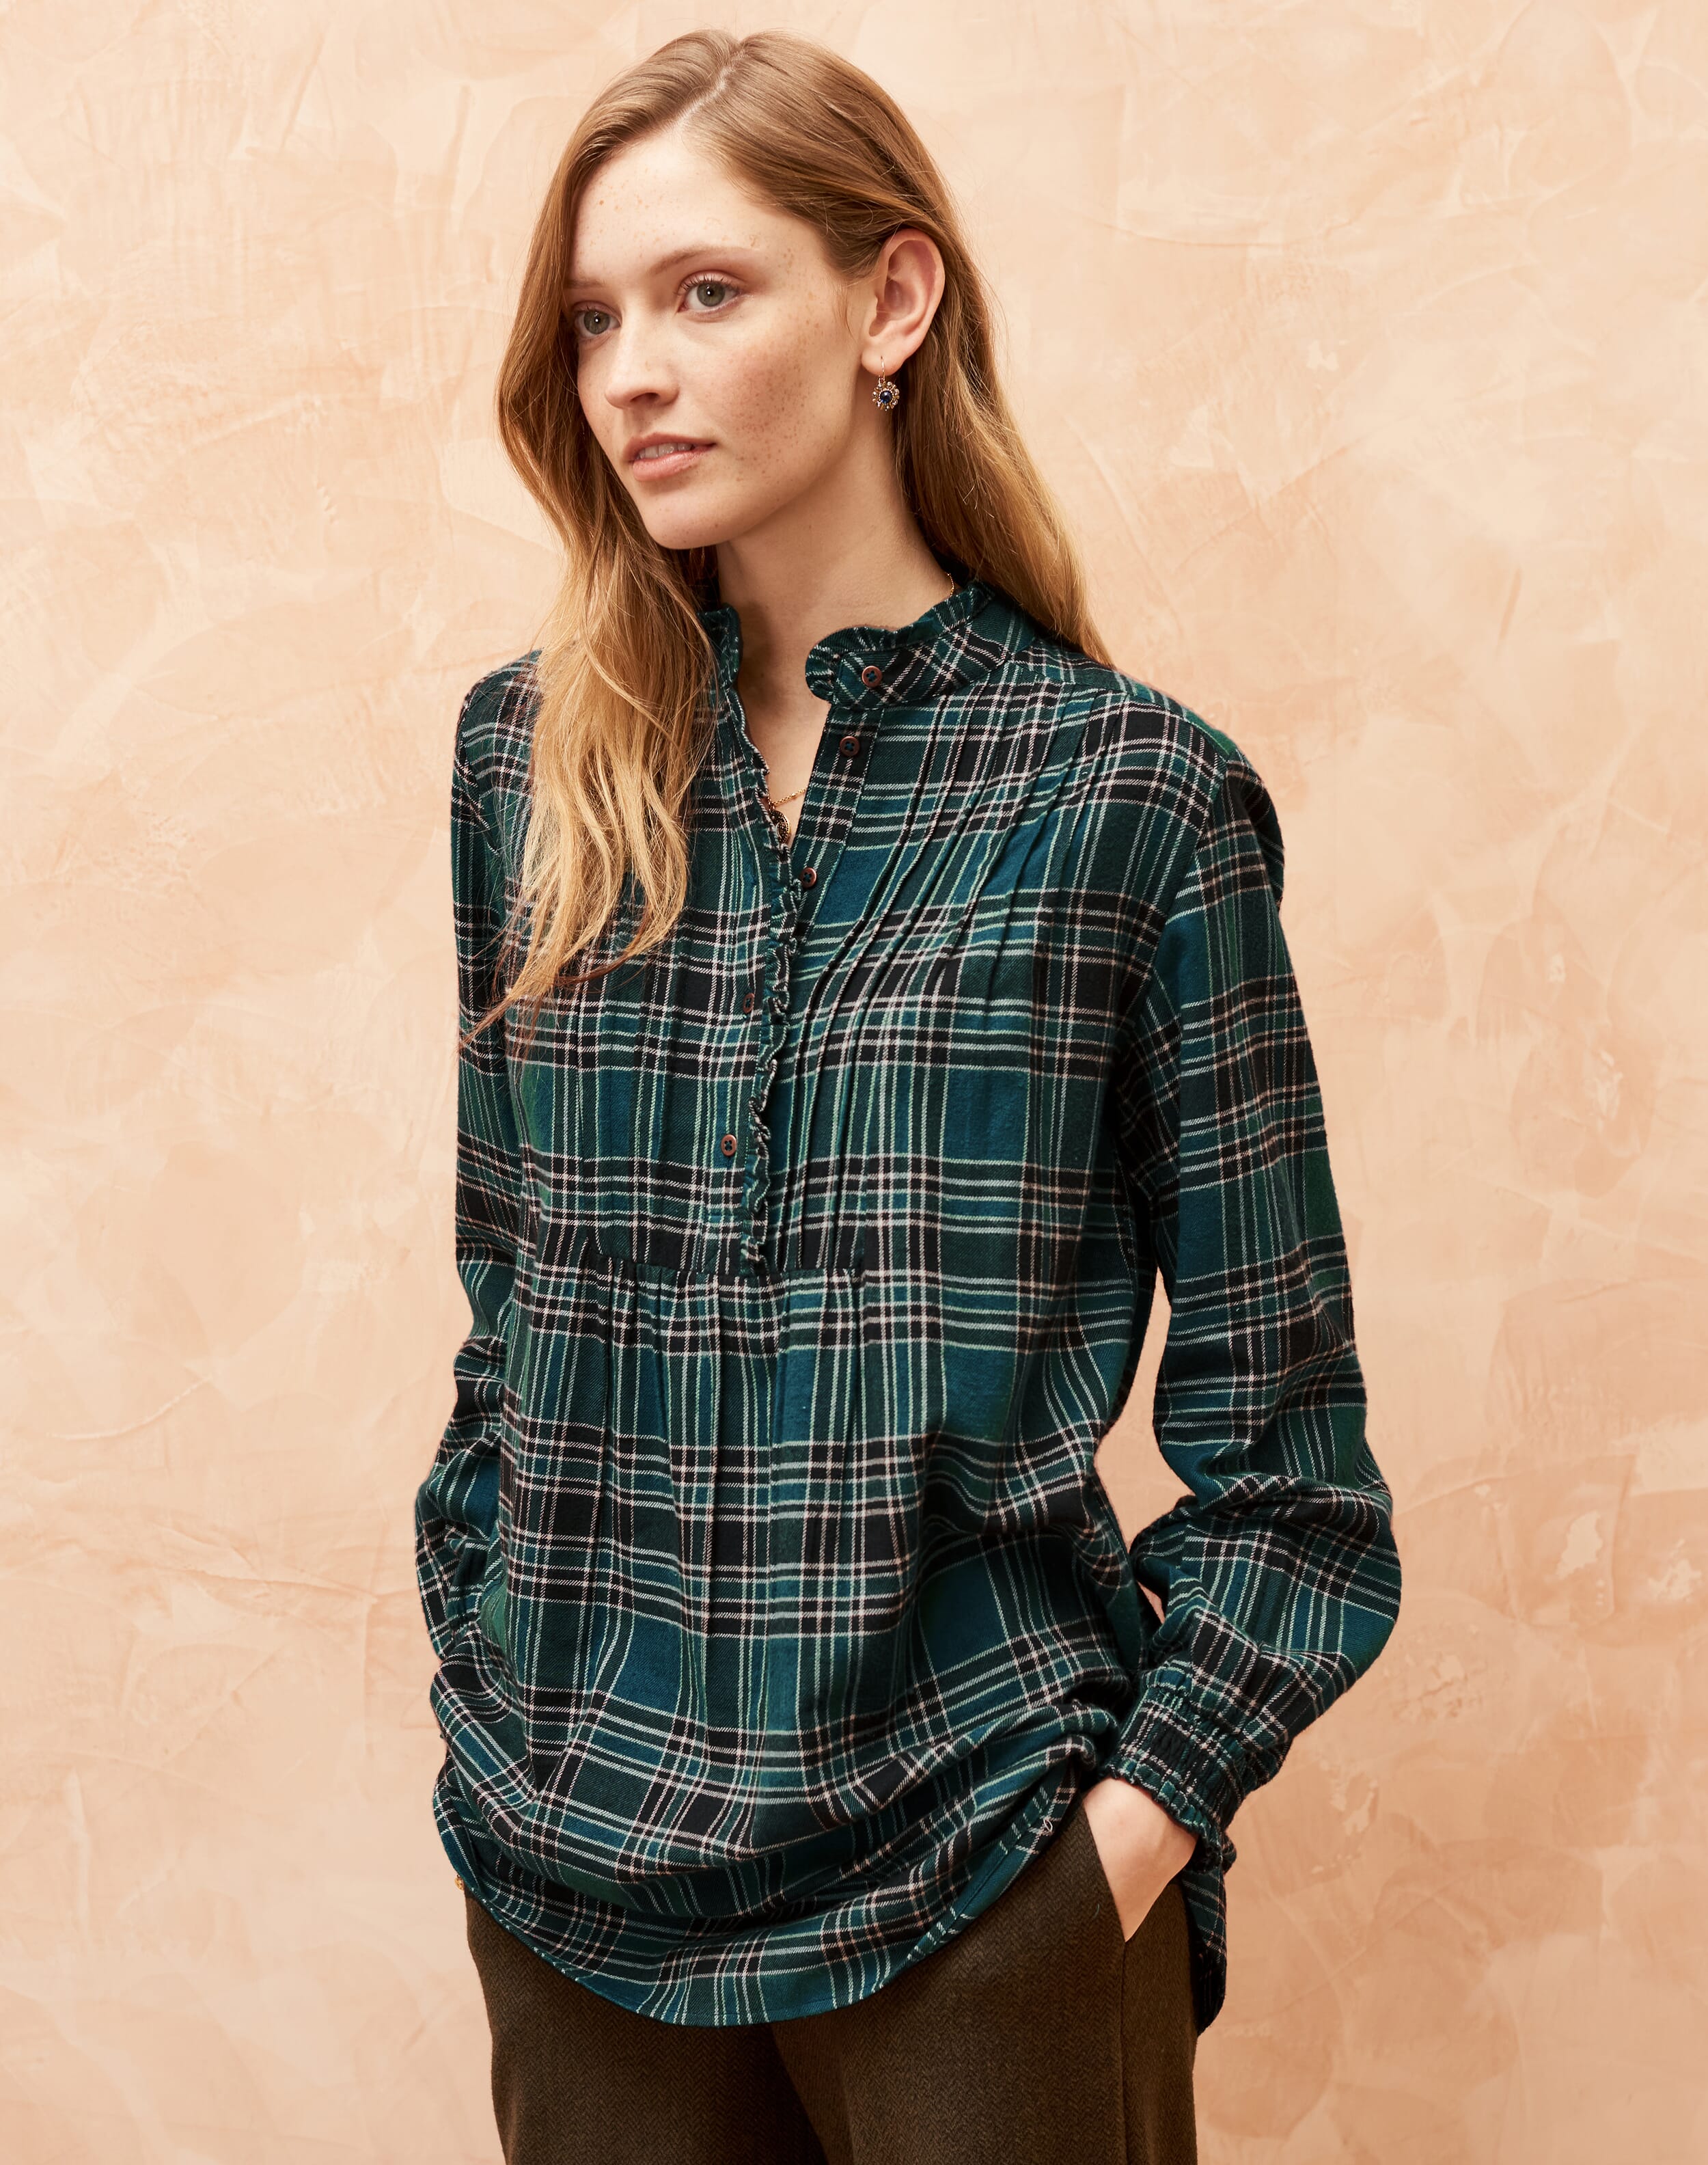 Brushed Cotton Check Shirt in Spruce & Black | Blouses | Brora